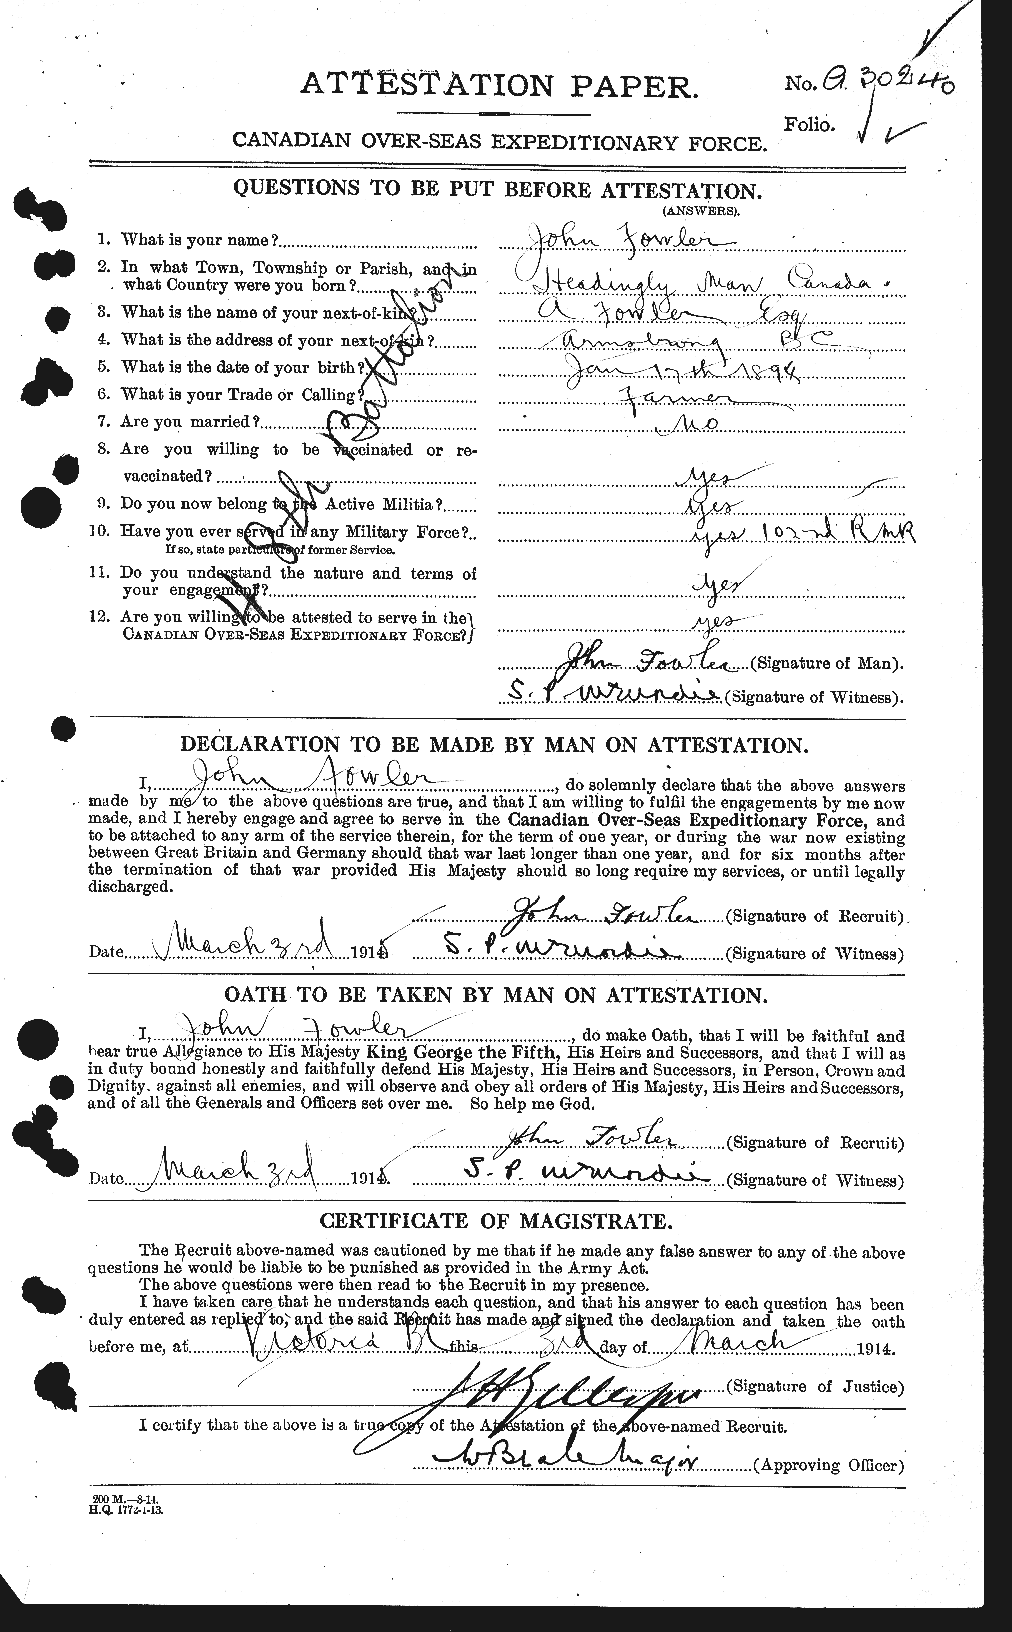 Personnel Records of the First World War - CEF 333109a